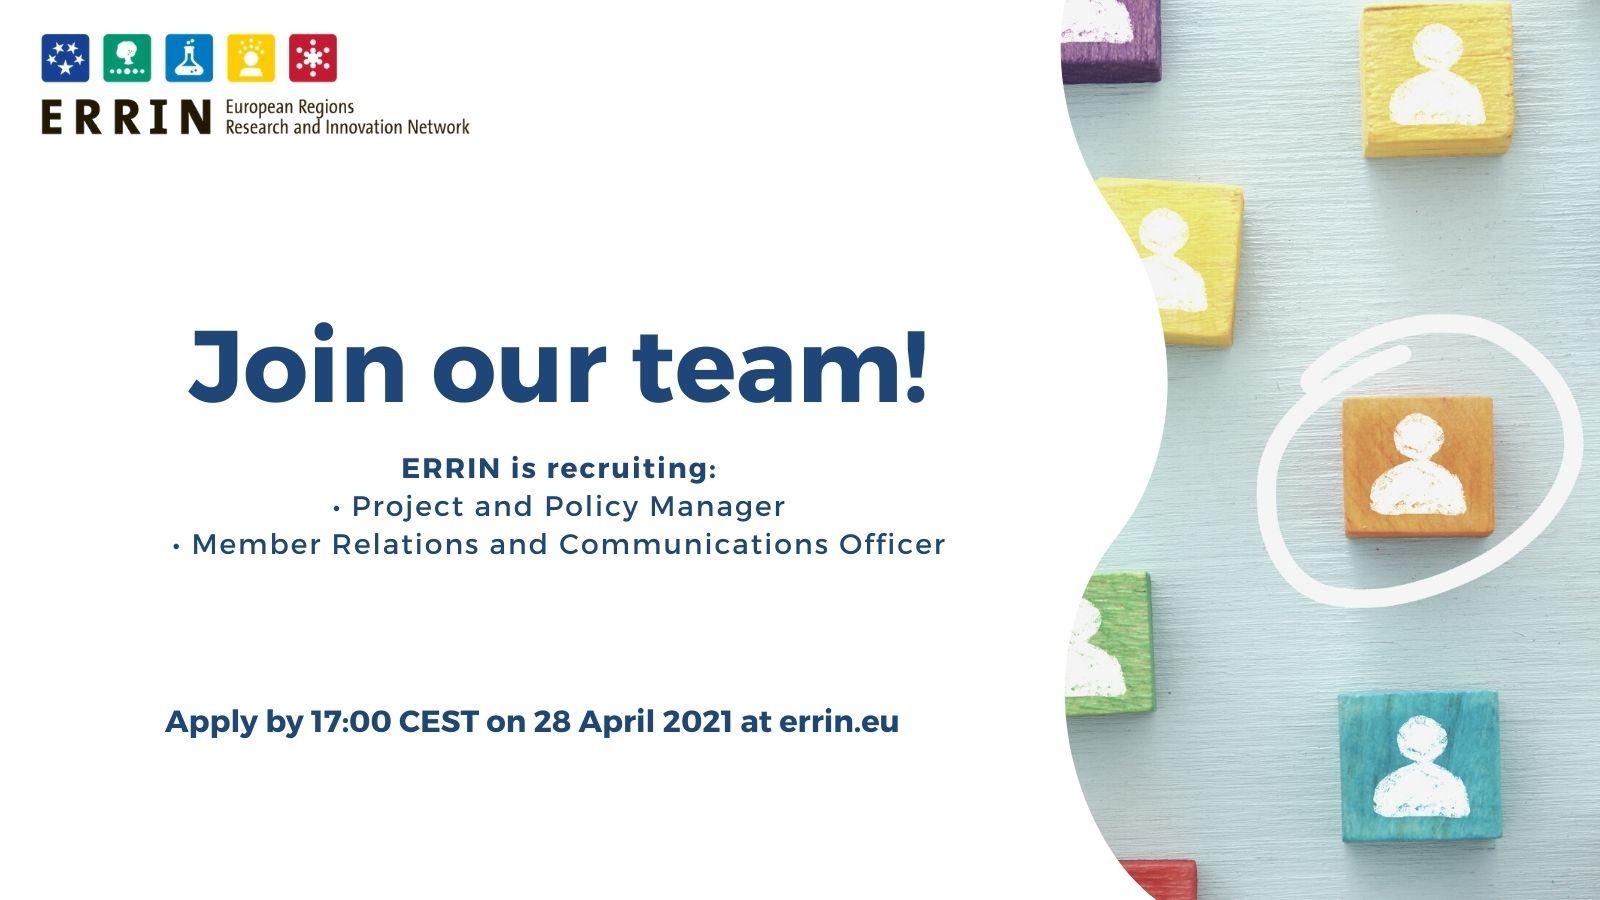 ERRIN is looking for Member Relations and Communications Officer (deadline: 28 April)